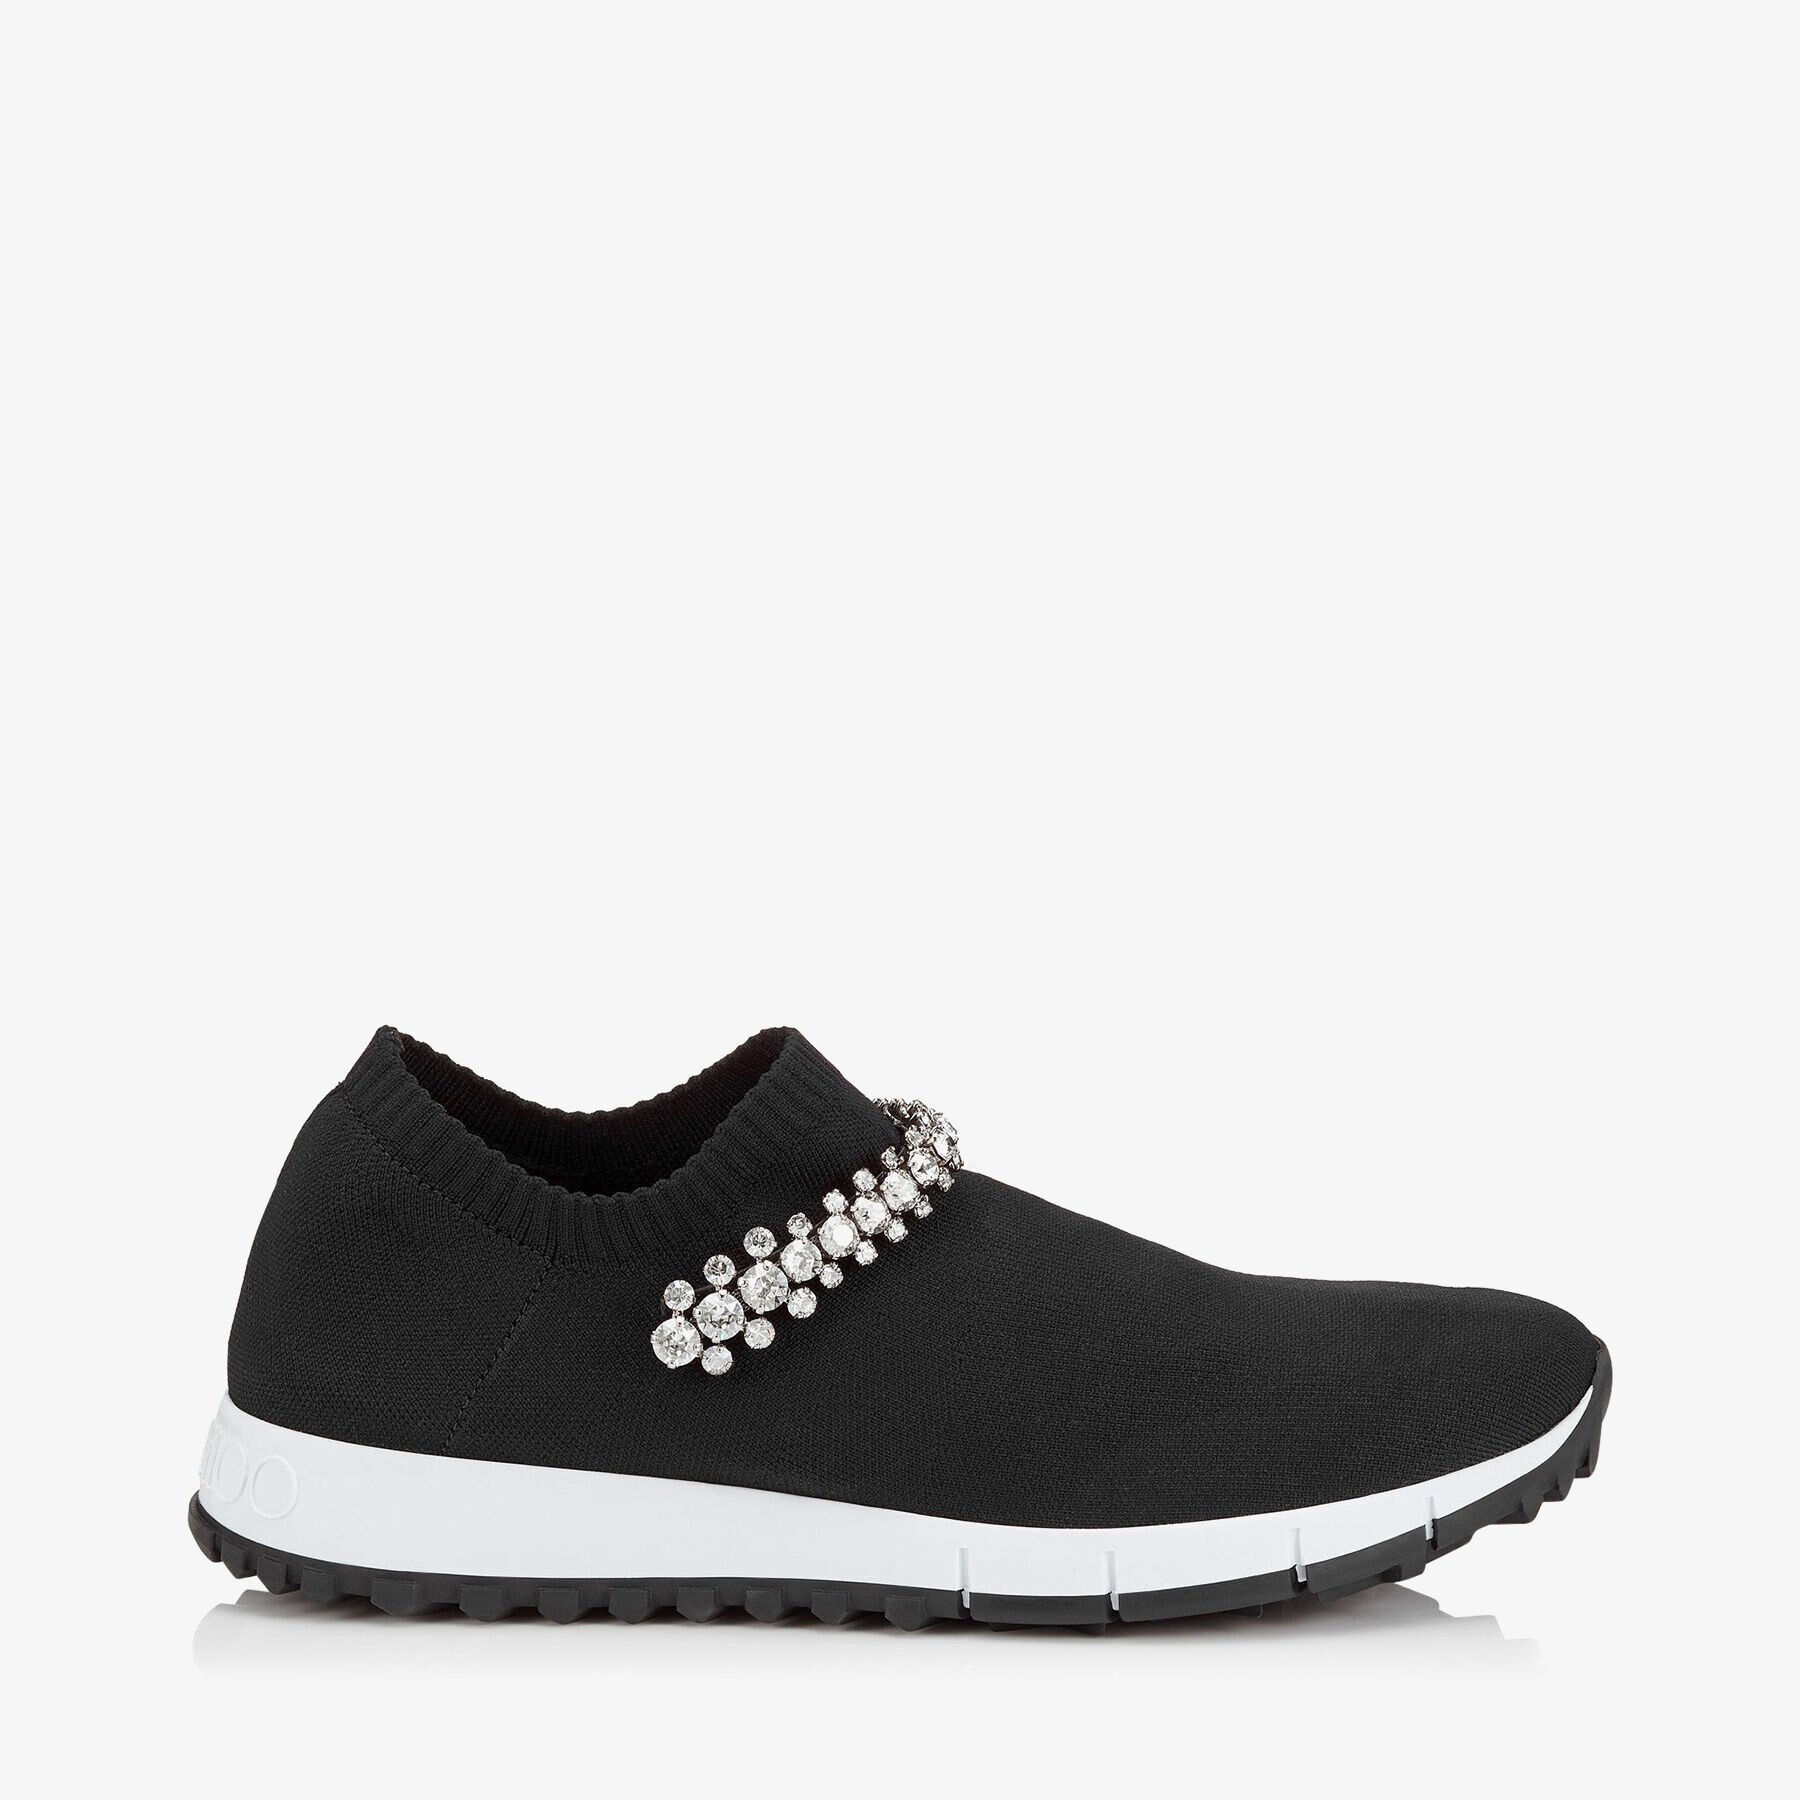 Verona Black Knit Trainers with Crystal Detailing - Php 57,500.jpg